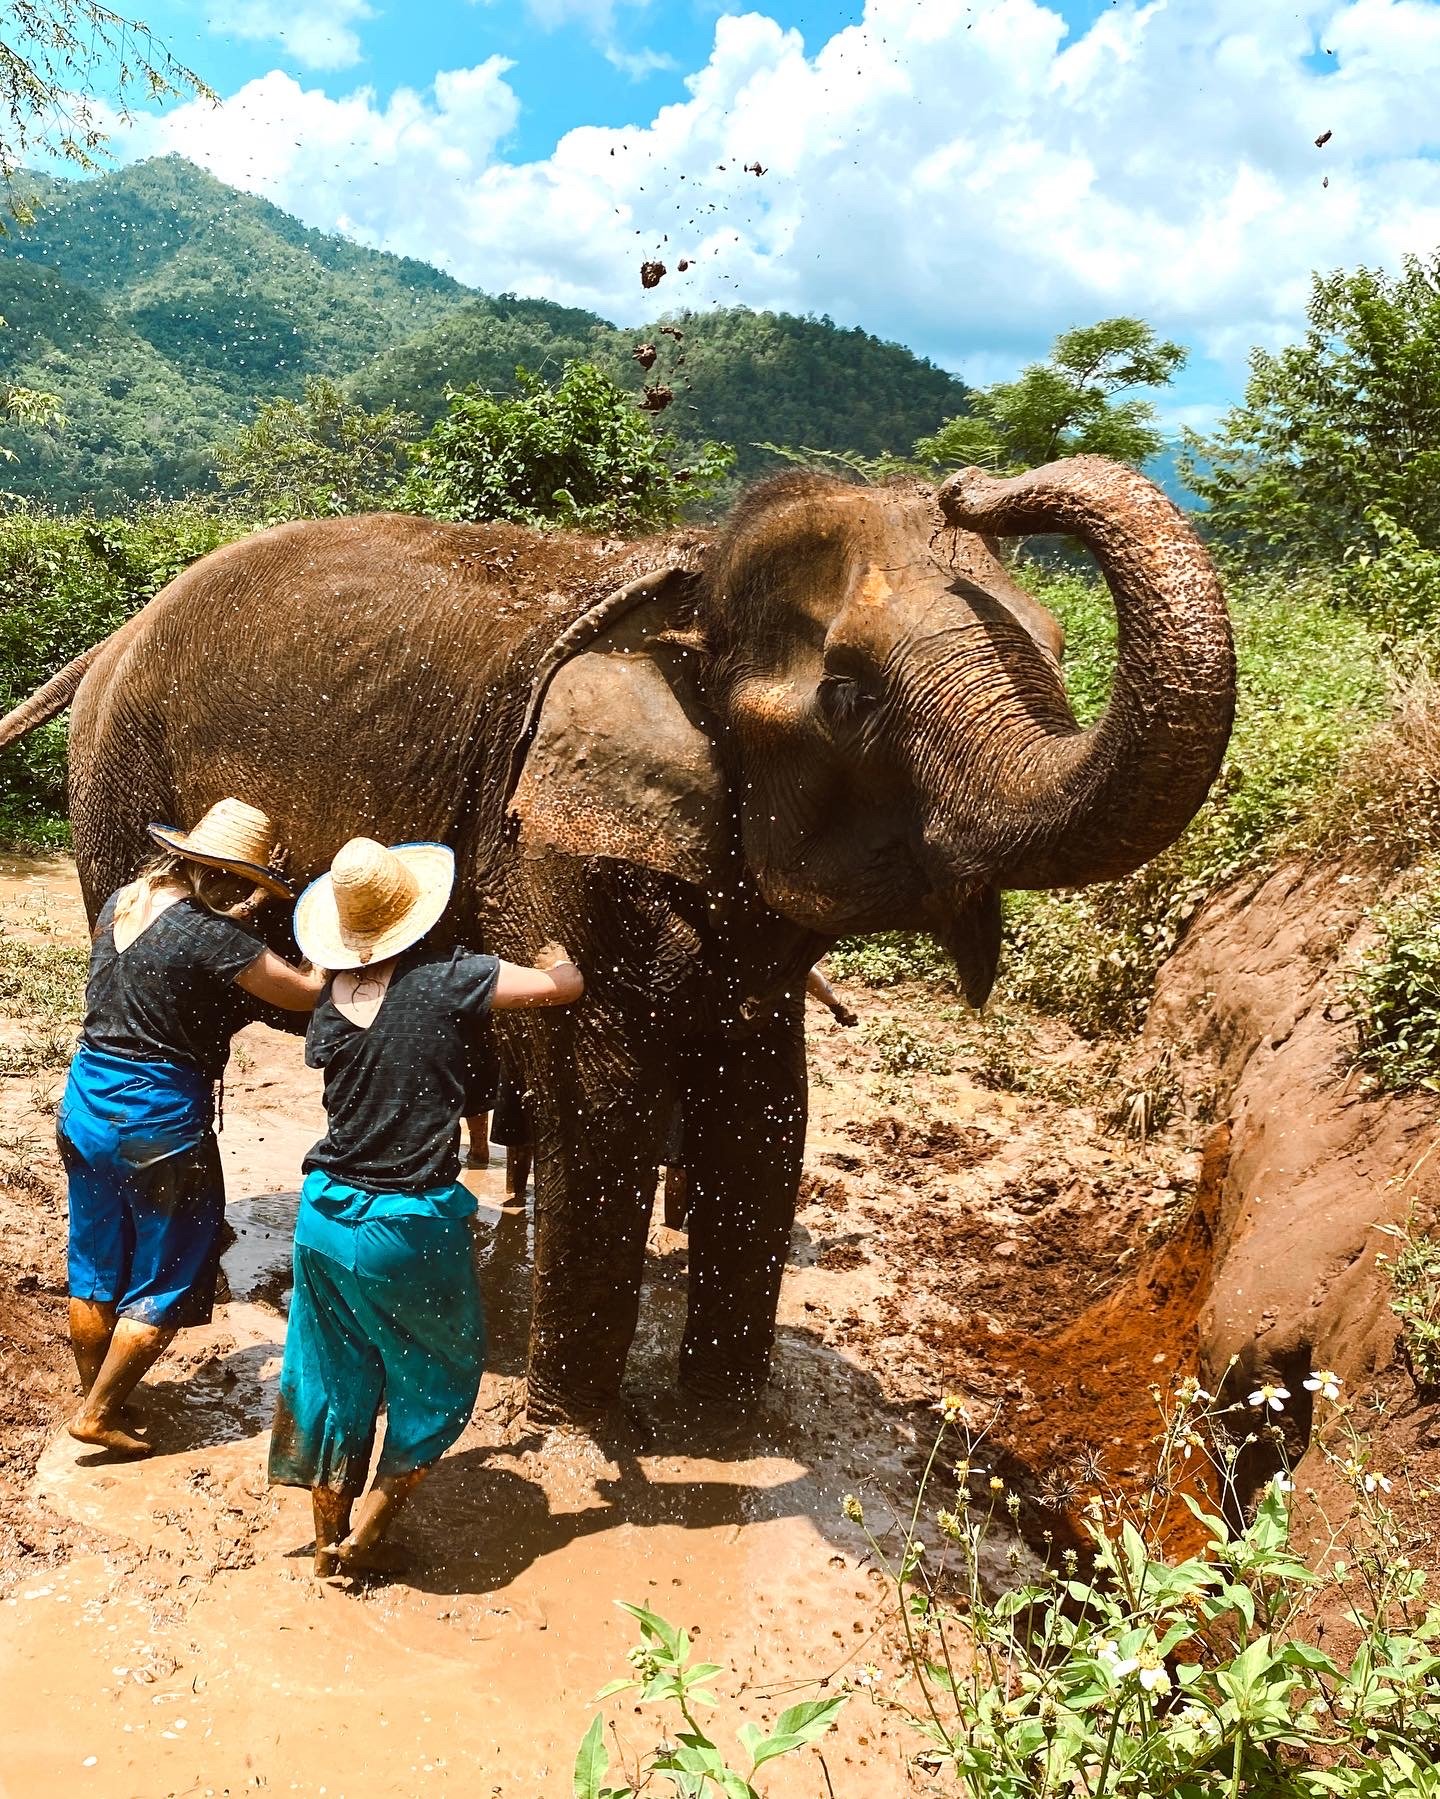 Mudding with the elephants 